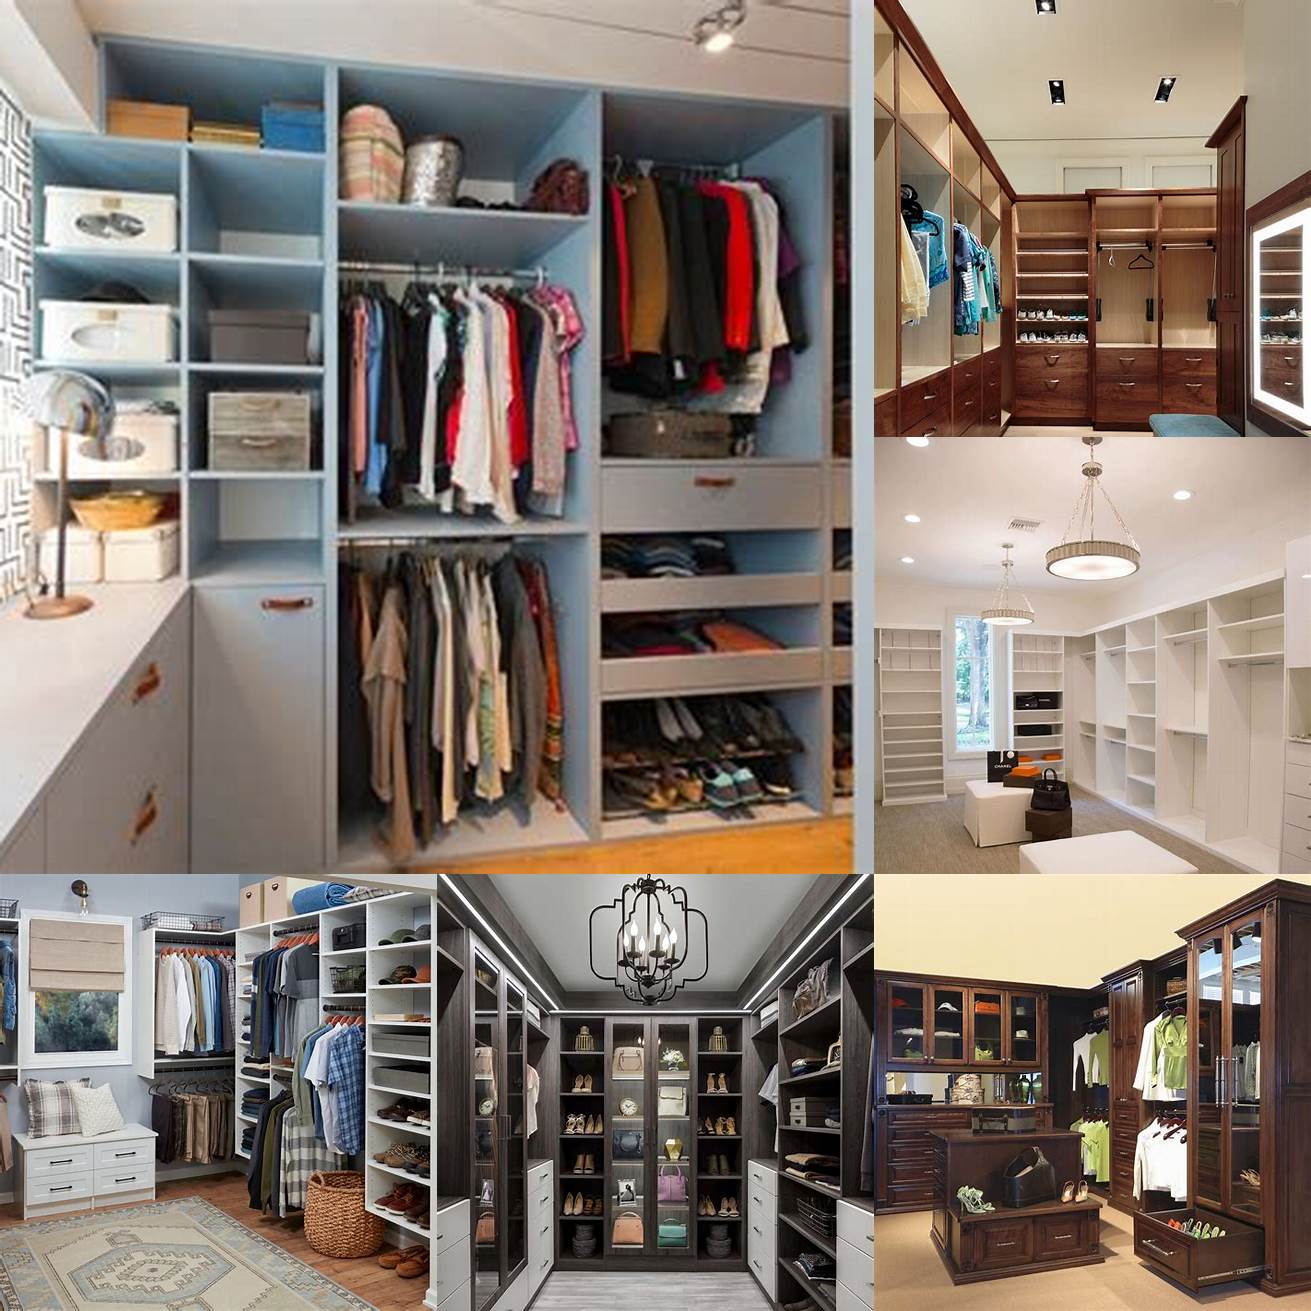 4 Customization Closet furniture can be customized to fit your needs and the size and shape of your space